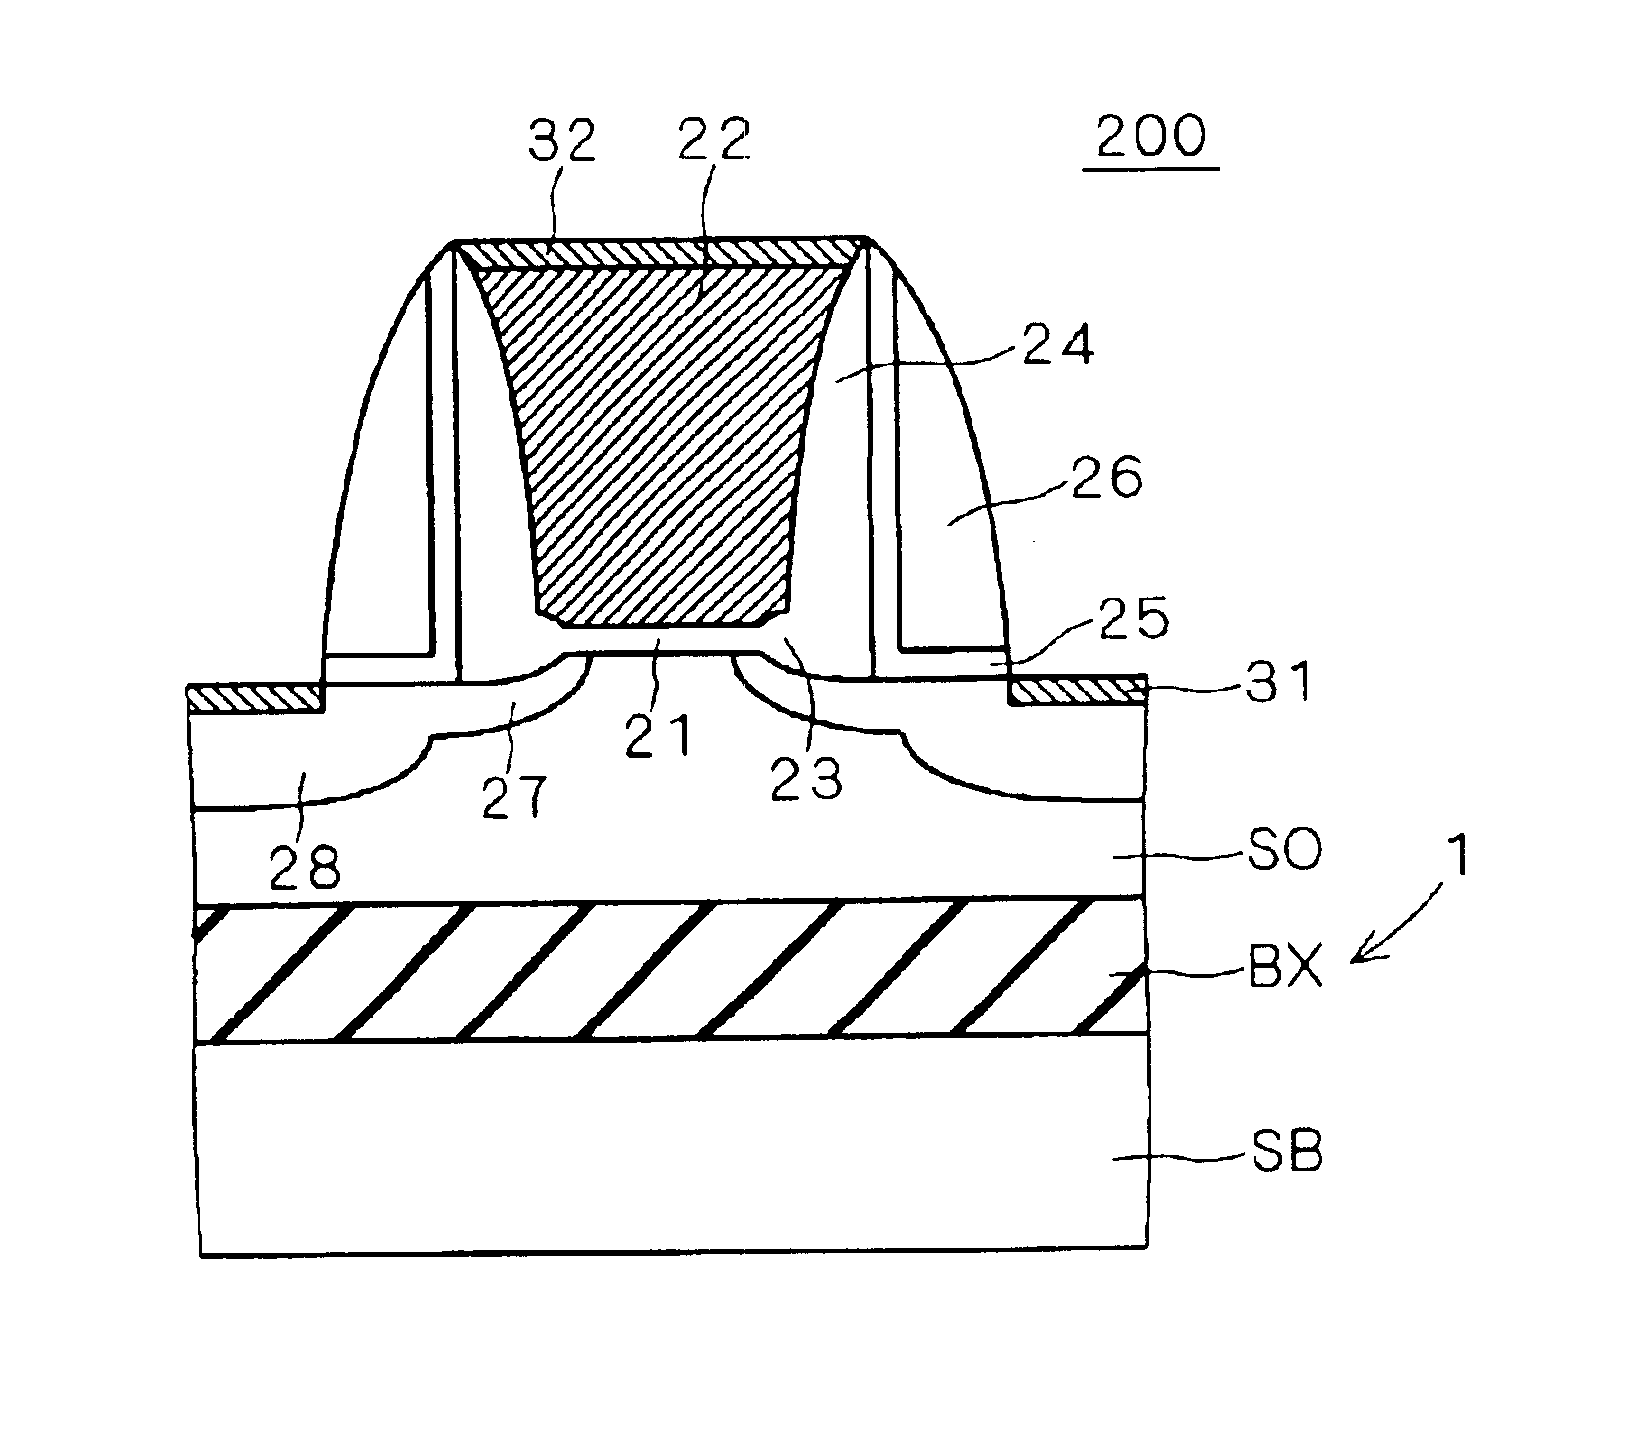 Semiconductor device of reduced gate overlap capacitance and method of manufacturing the semiconductor device